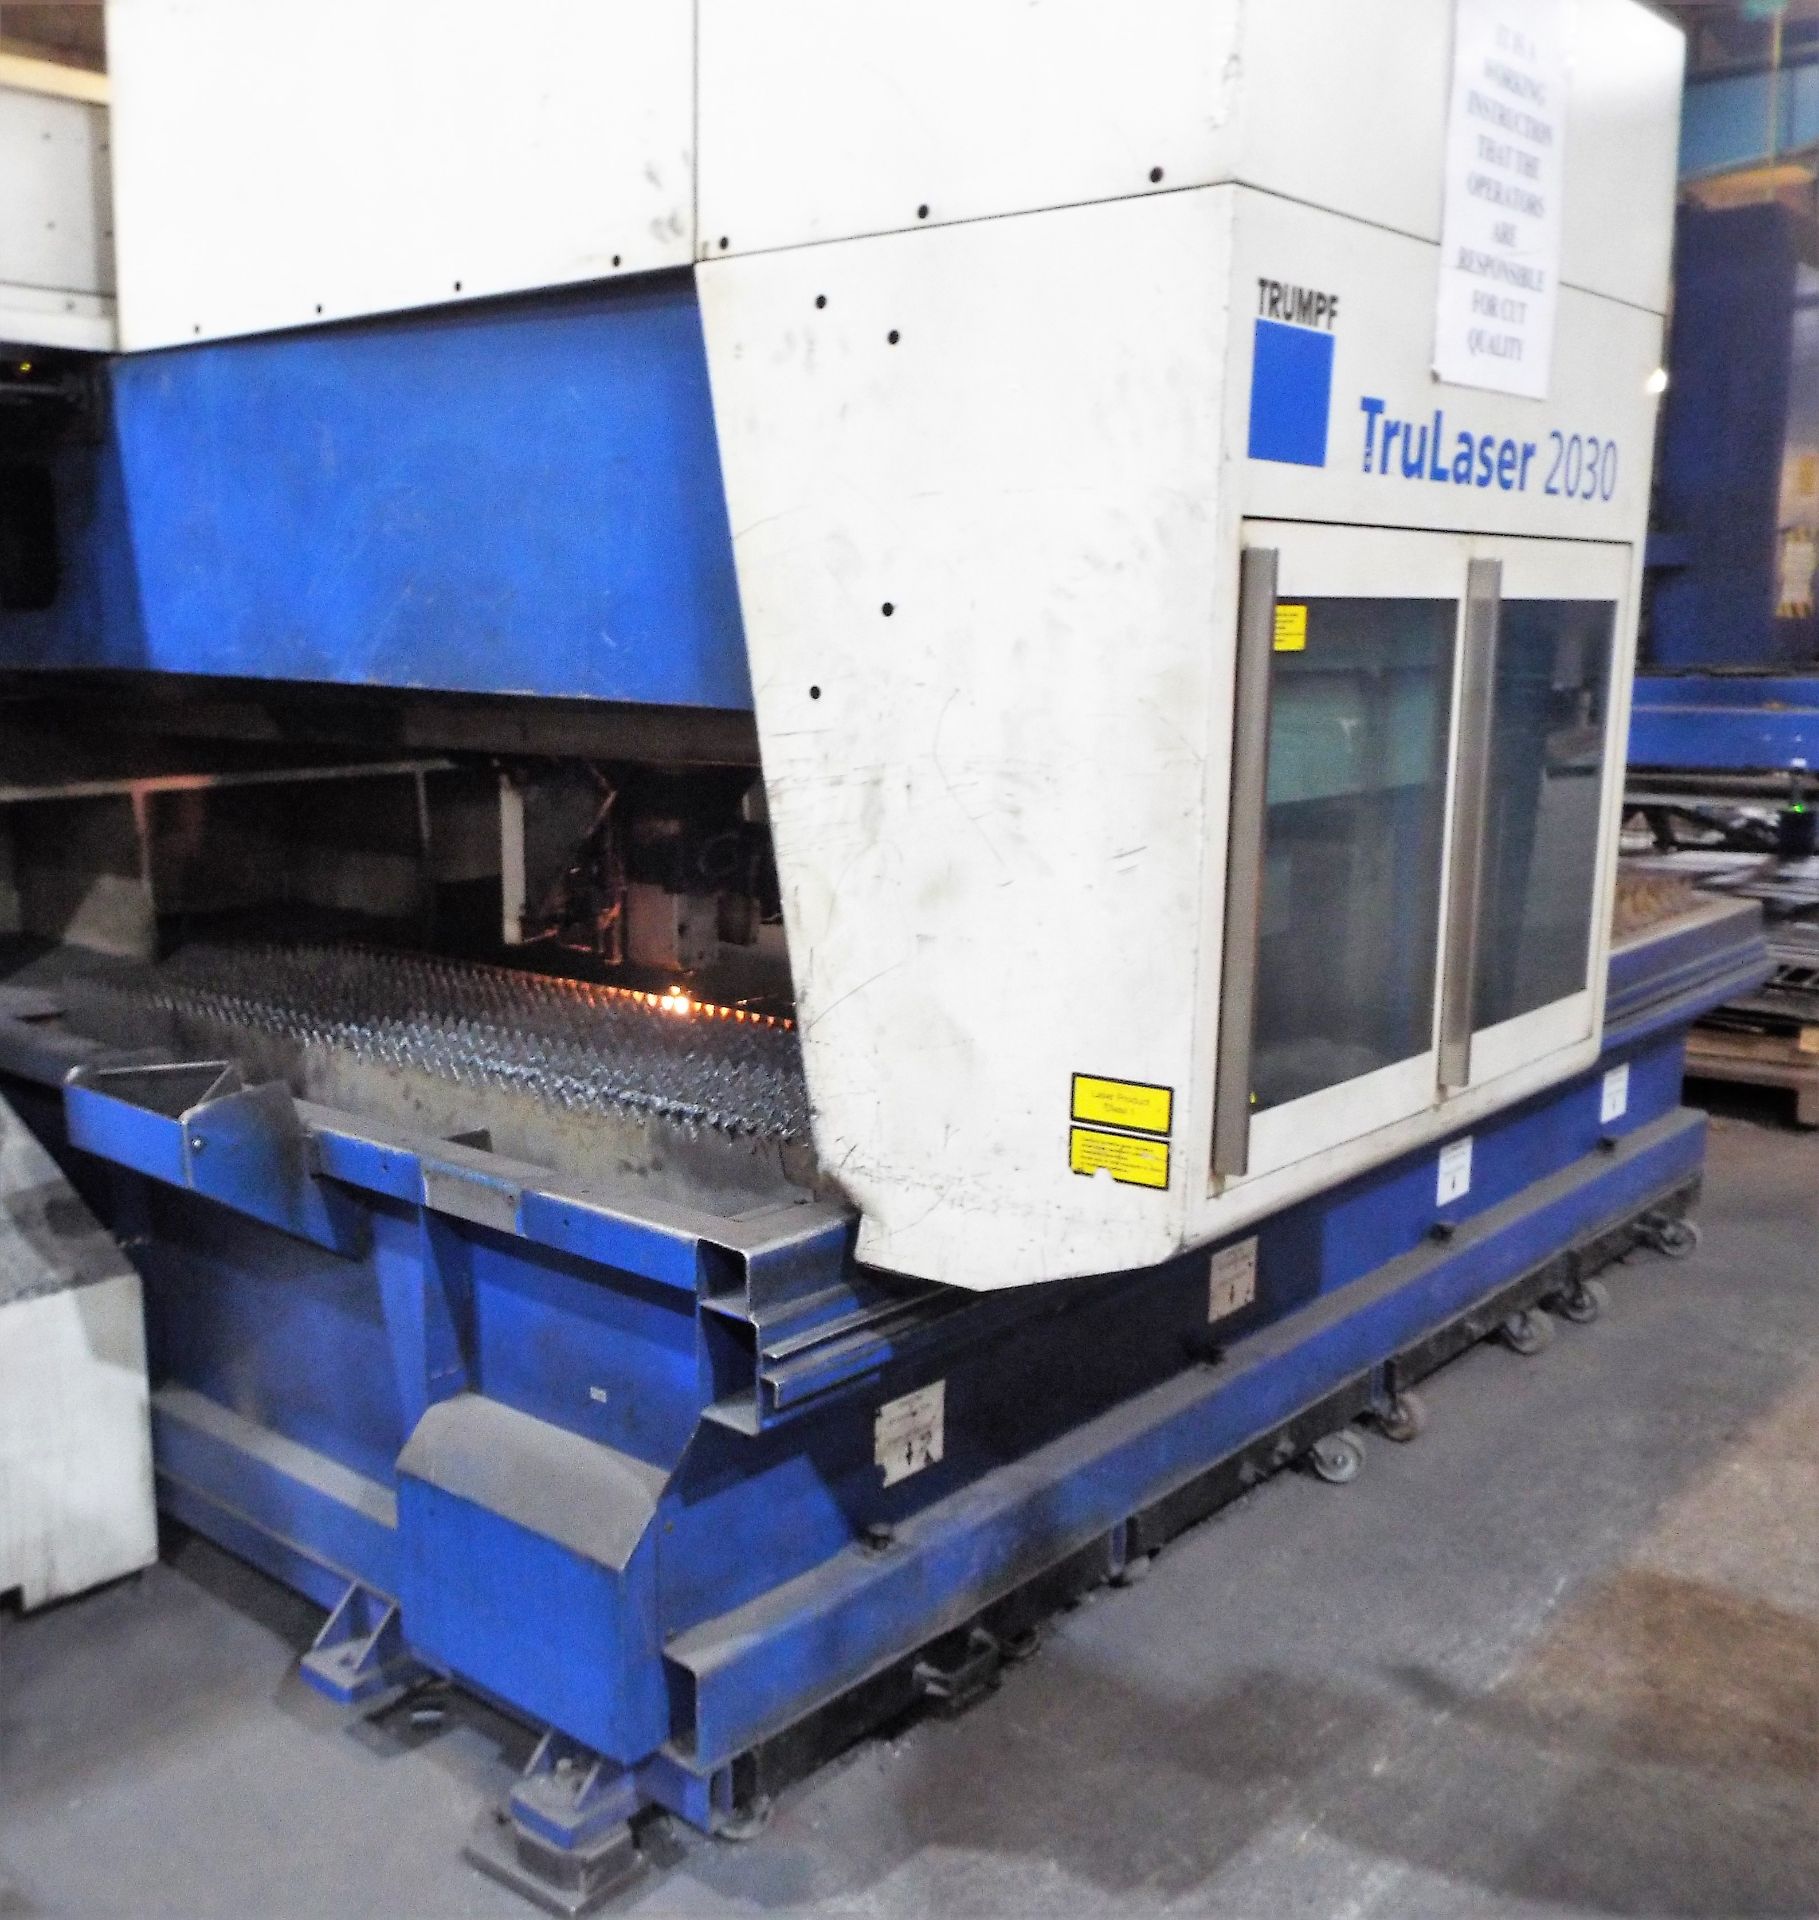 Trumpf 2030 TruCoax 2000 Laser Cutting Cell. - Image 10 of 22